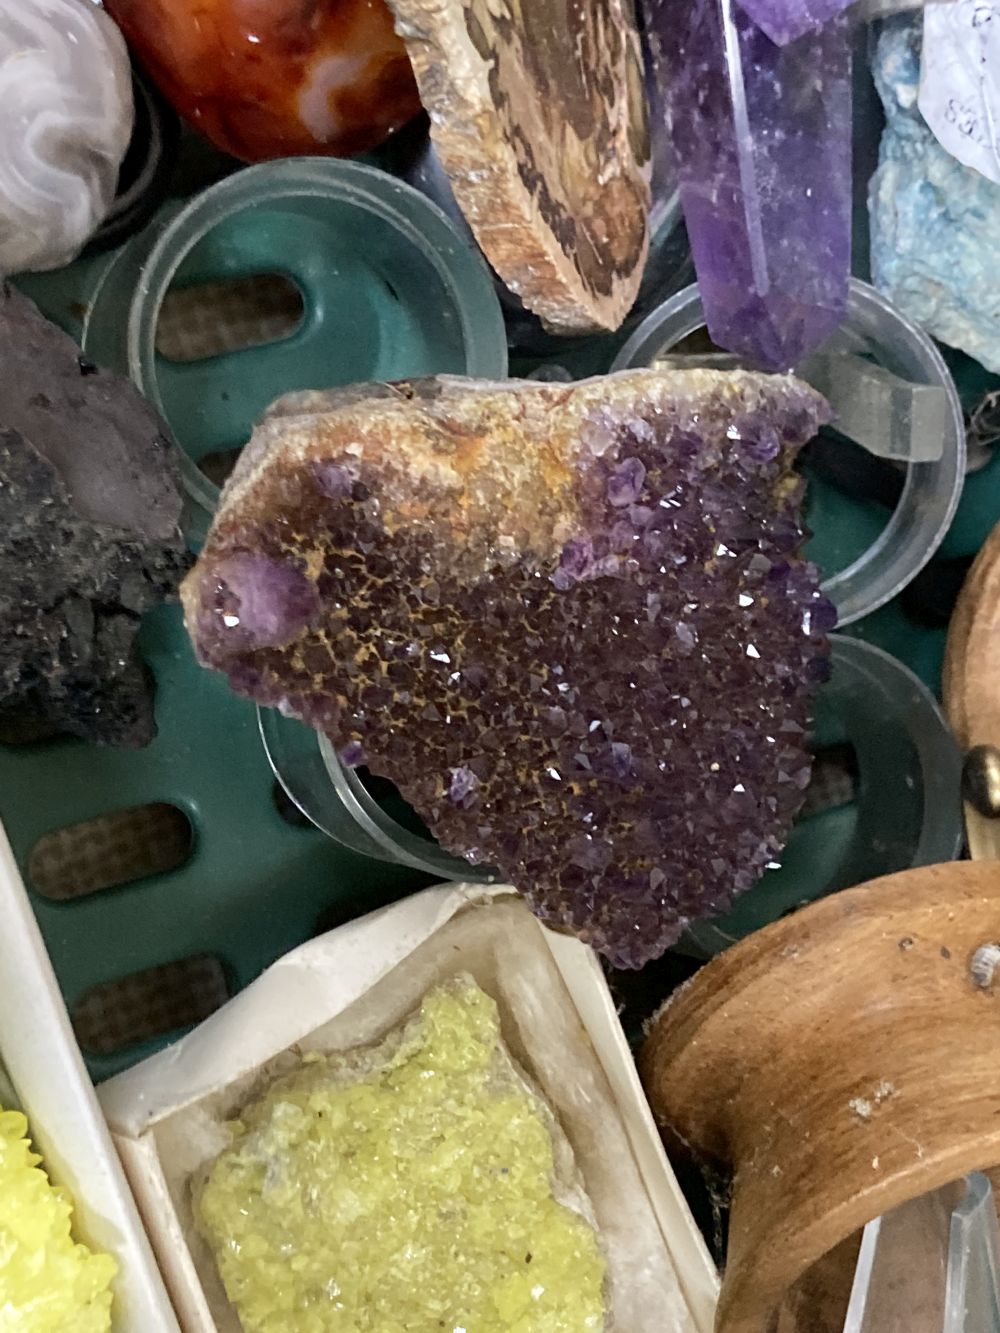 A collection of minerals and fossils